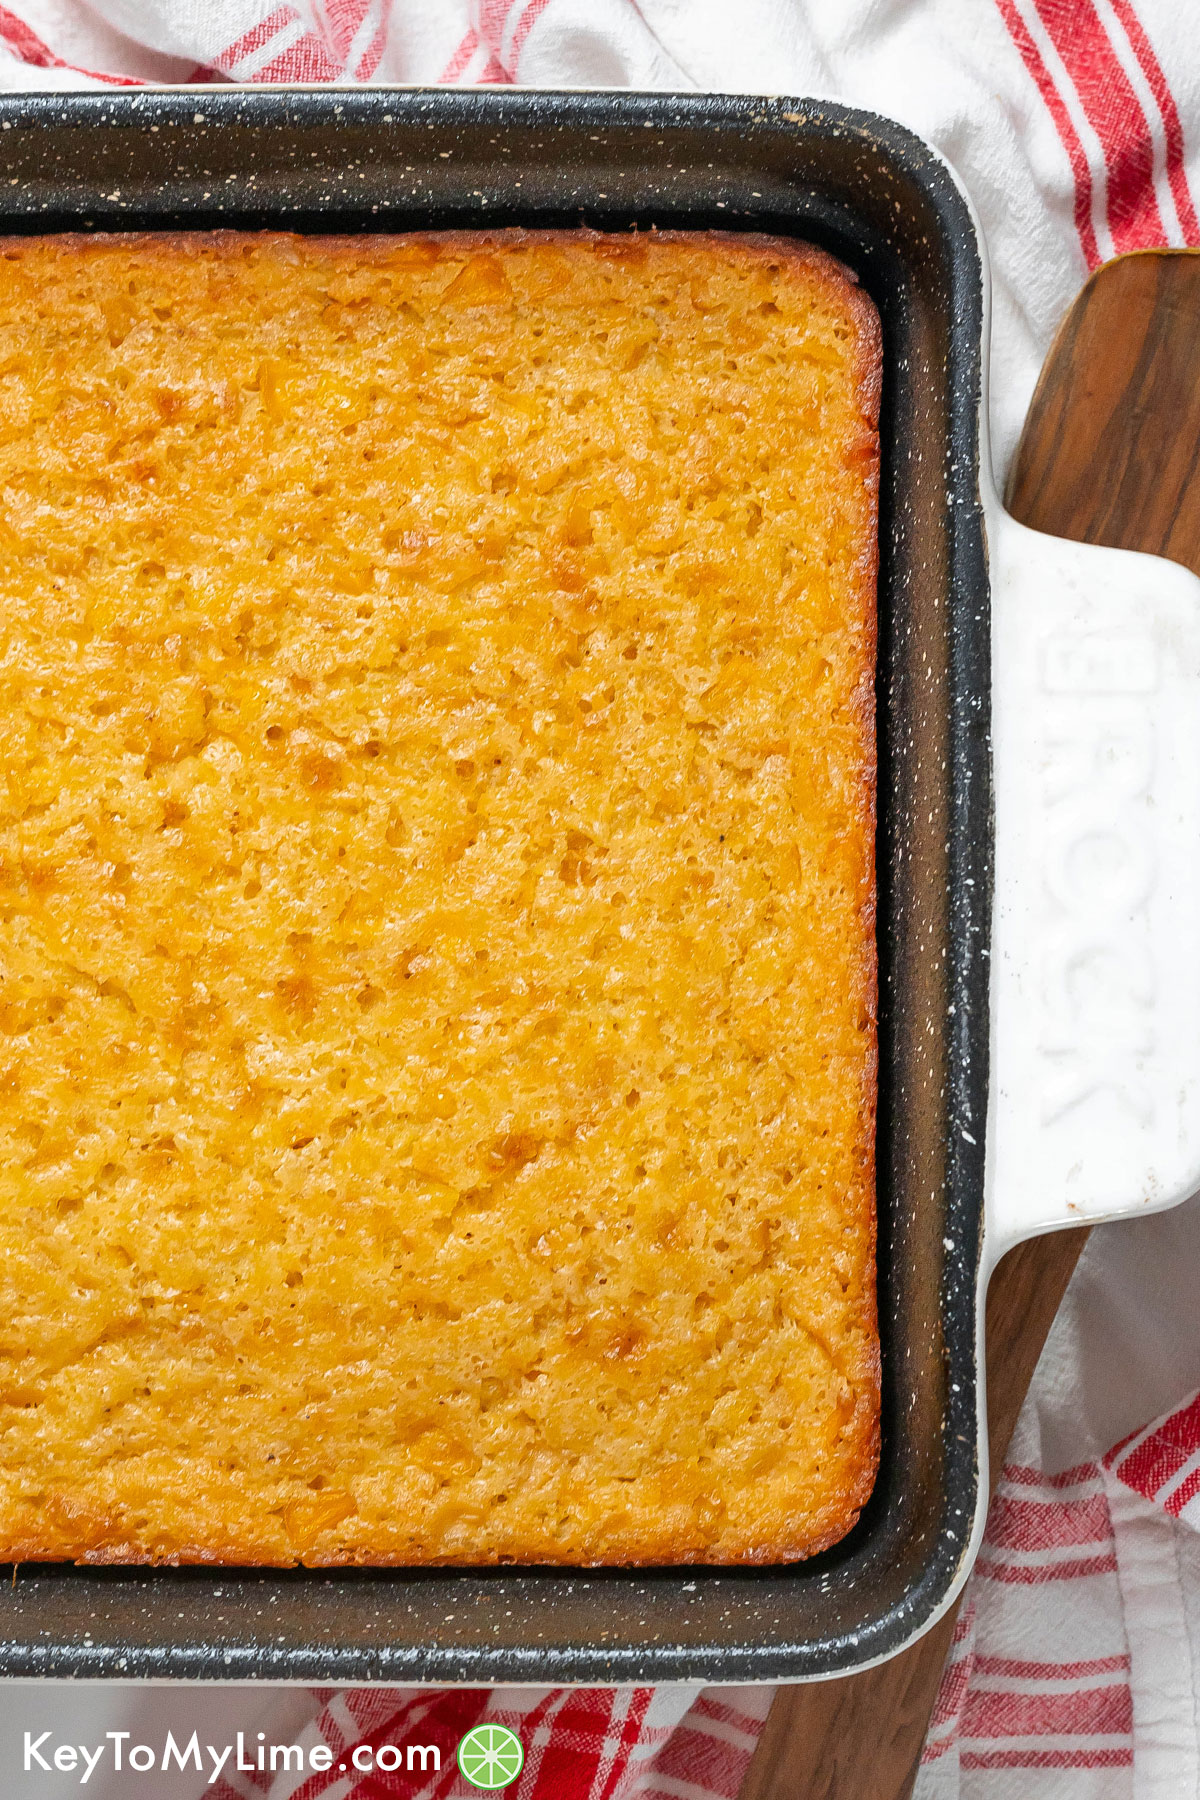 An overhead image of a finished corn casserole dish with golden edges throughout.